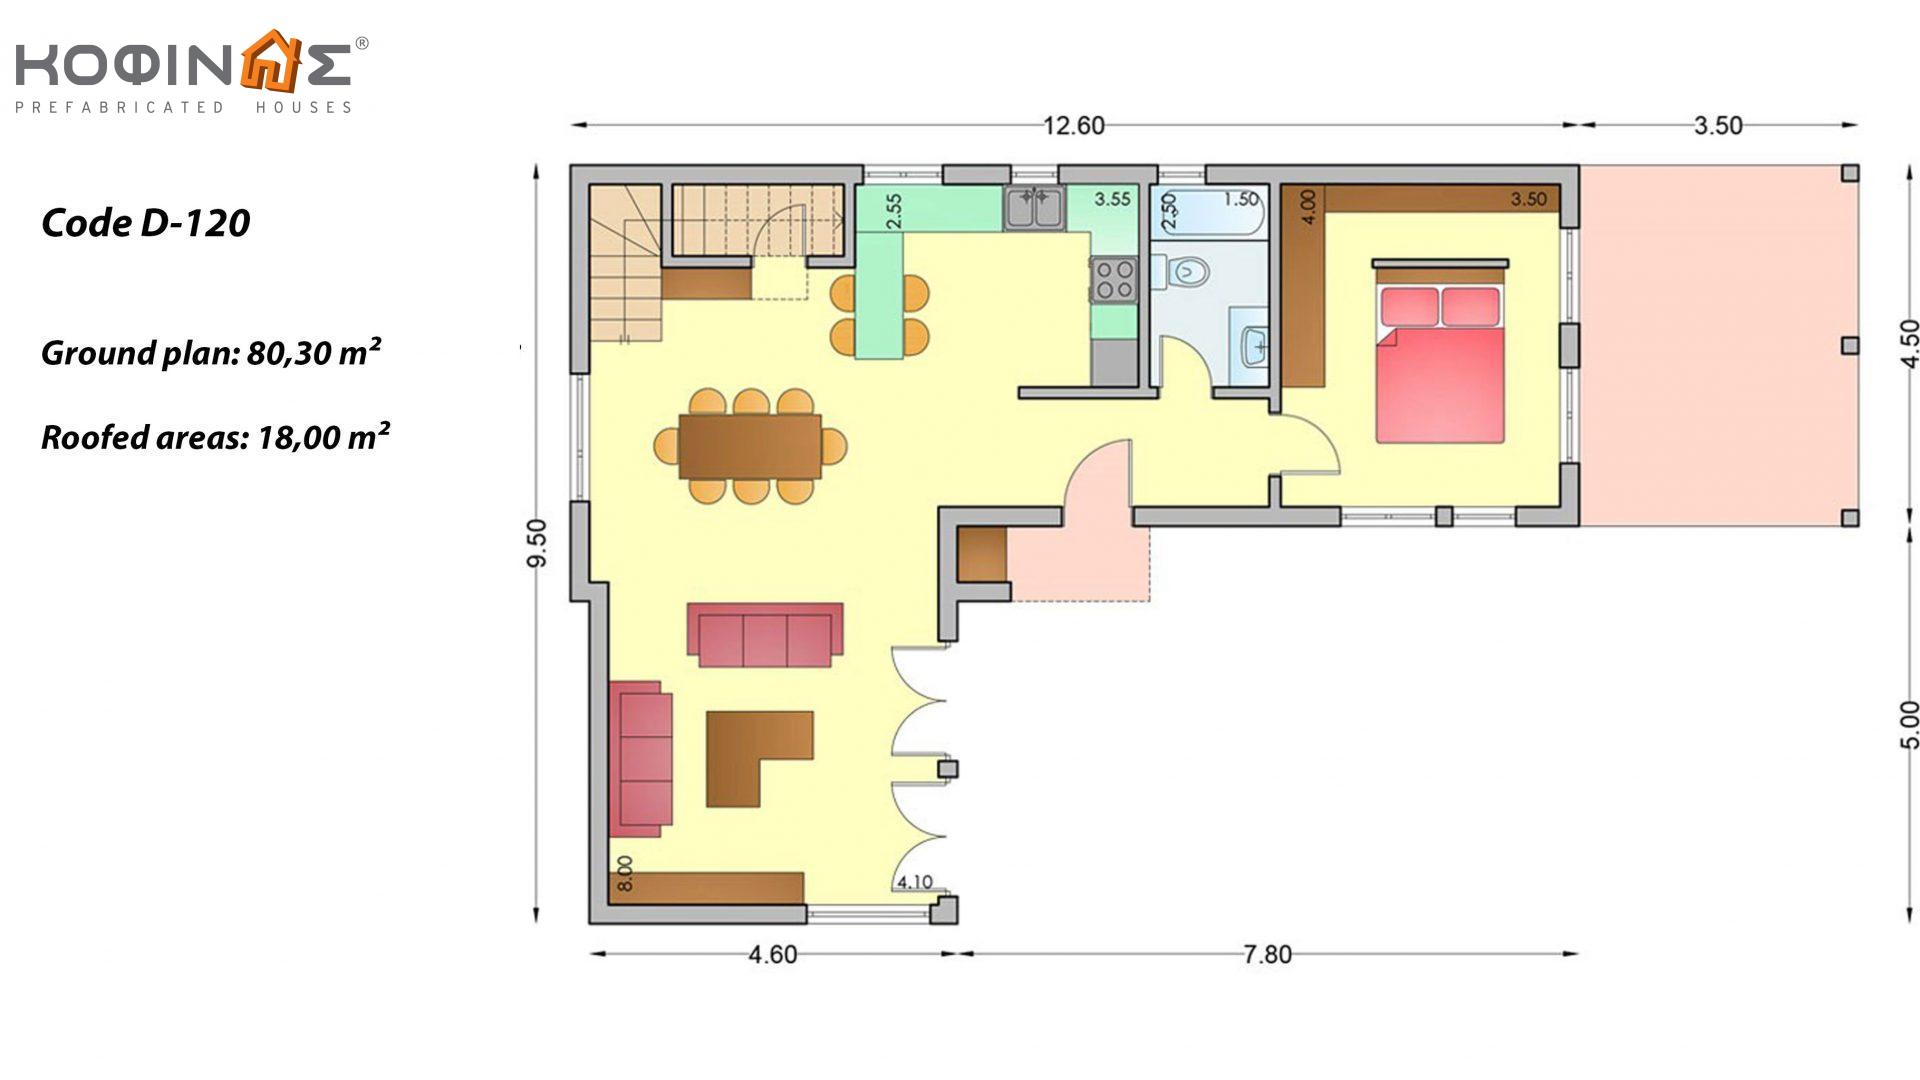 2-story house D-120, total surface of 120,20 m²,covered roofed areas 18,00 m²,balconies 42,16 m²